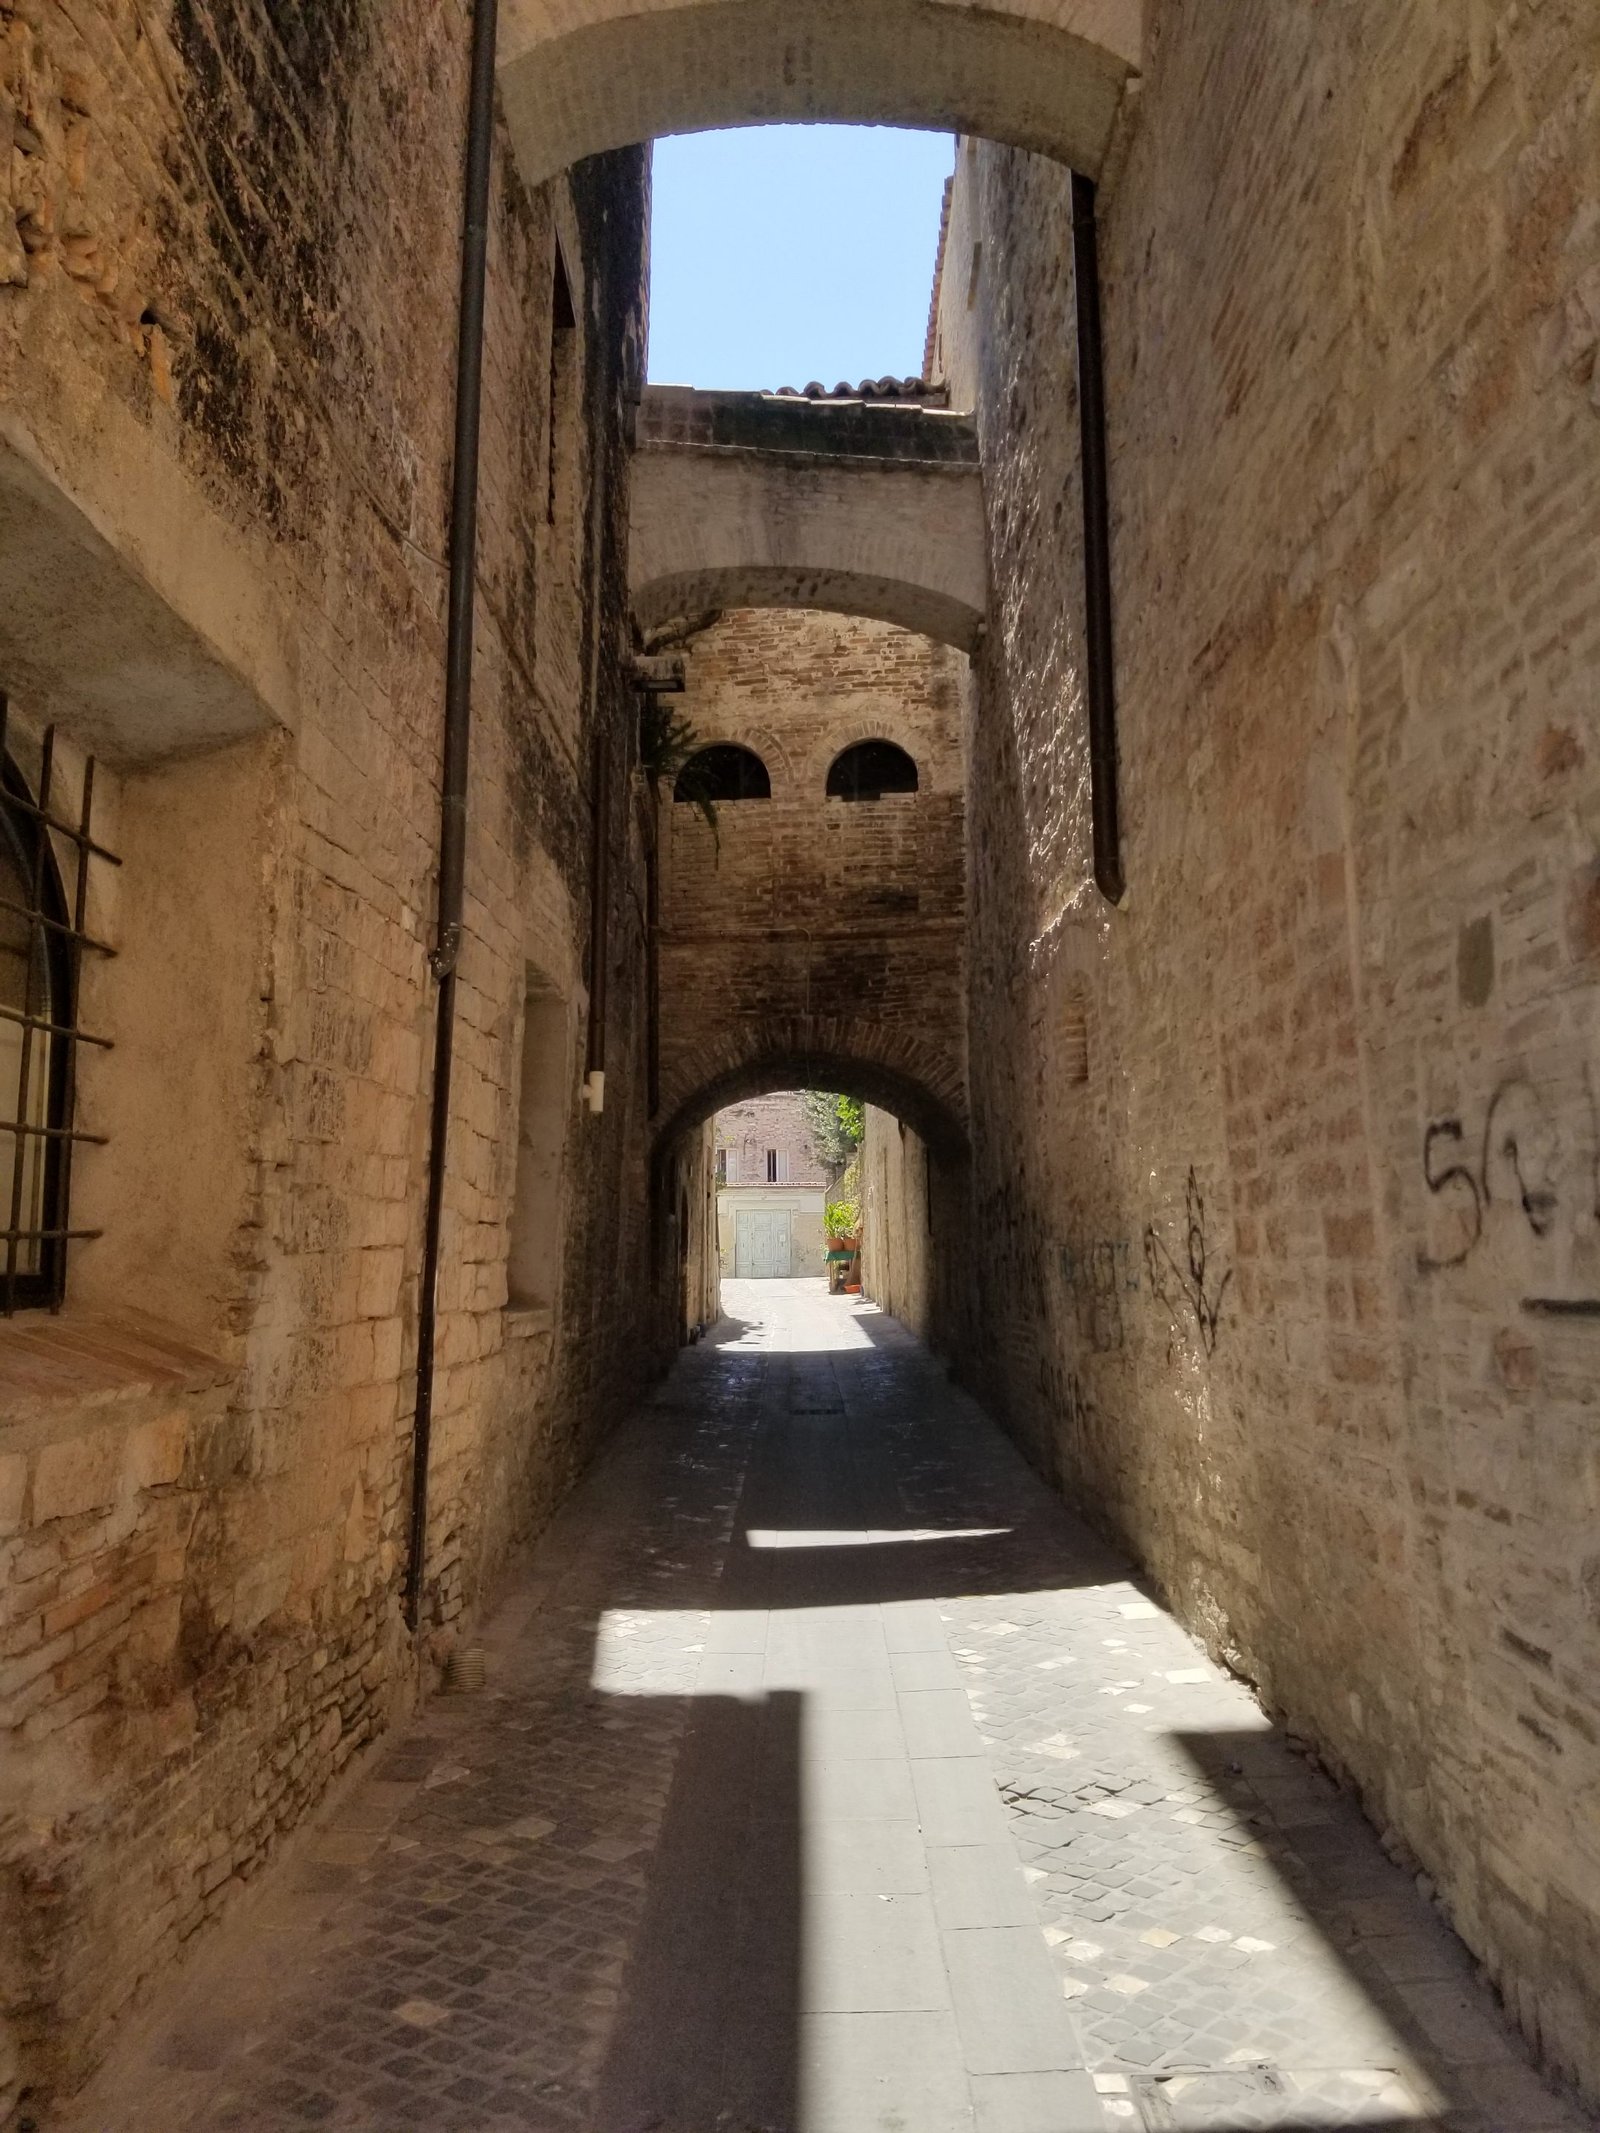 Foligno, Italy - A beautiful medieval town in Umbria. https://ouritalianjourney.com/foligno-italy-wonderful-month-in-umbria